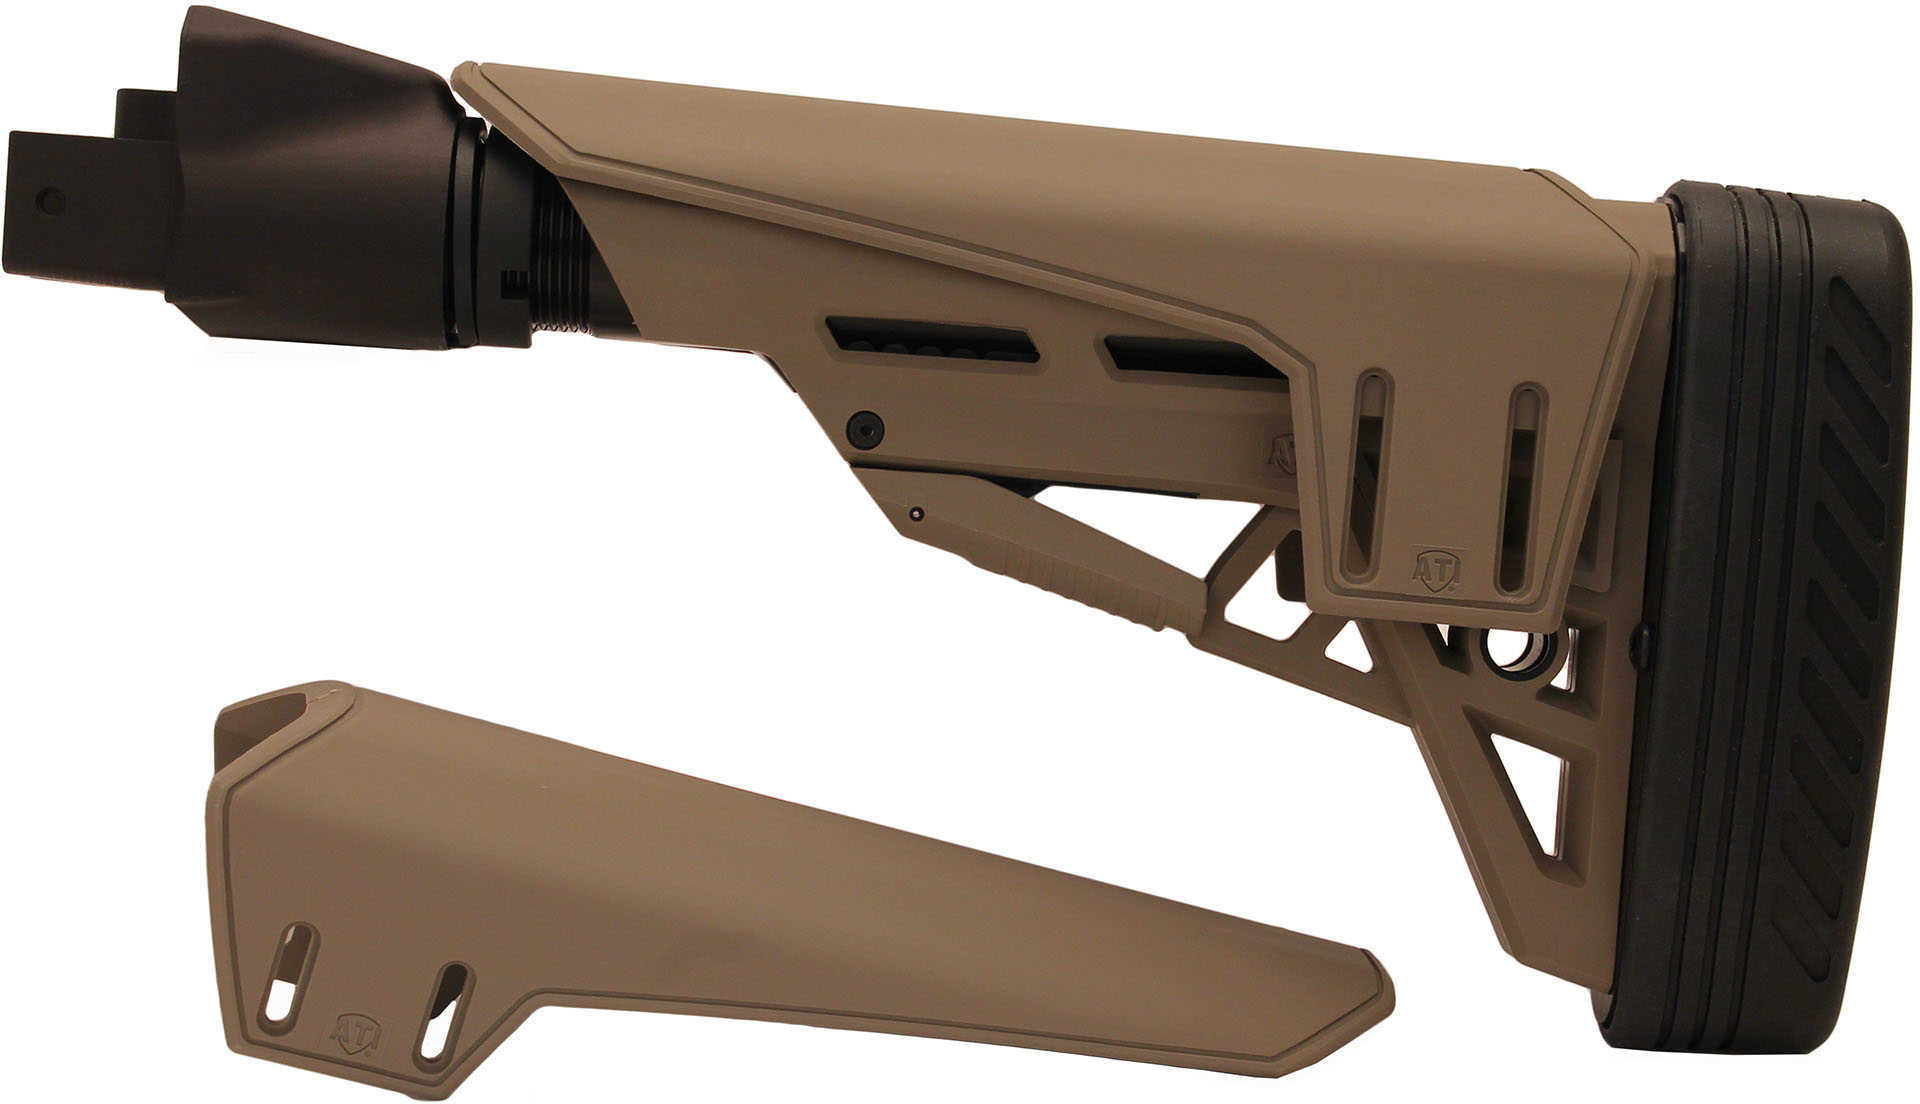 Advanced Technology Intl. Saiga TactLite Elite Six Position Adjustable Stock With Scorpion Recoil Pad